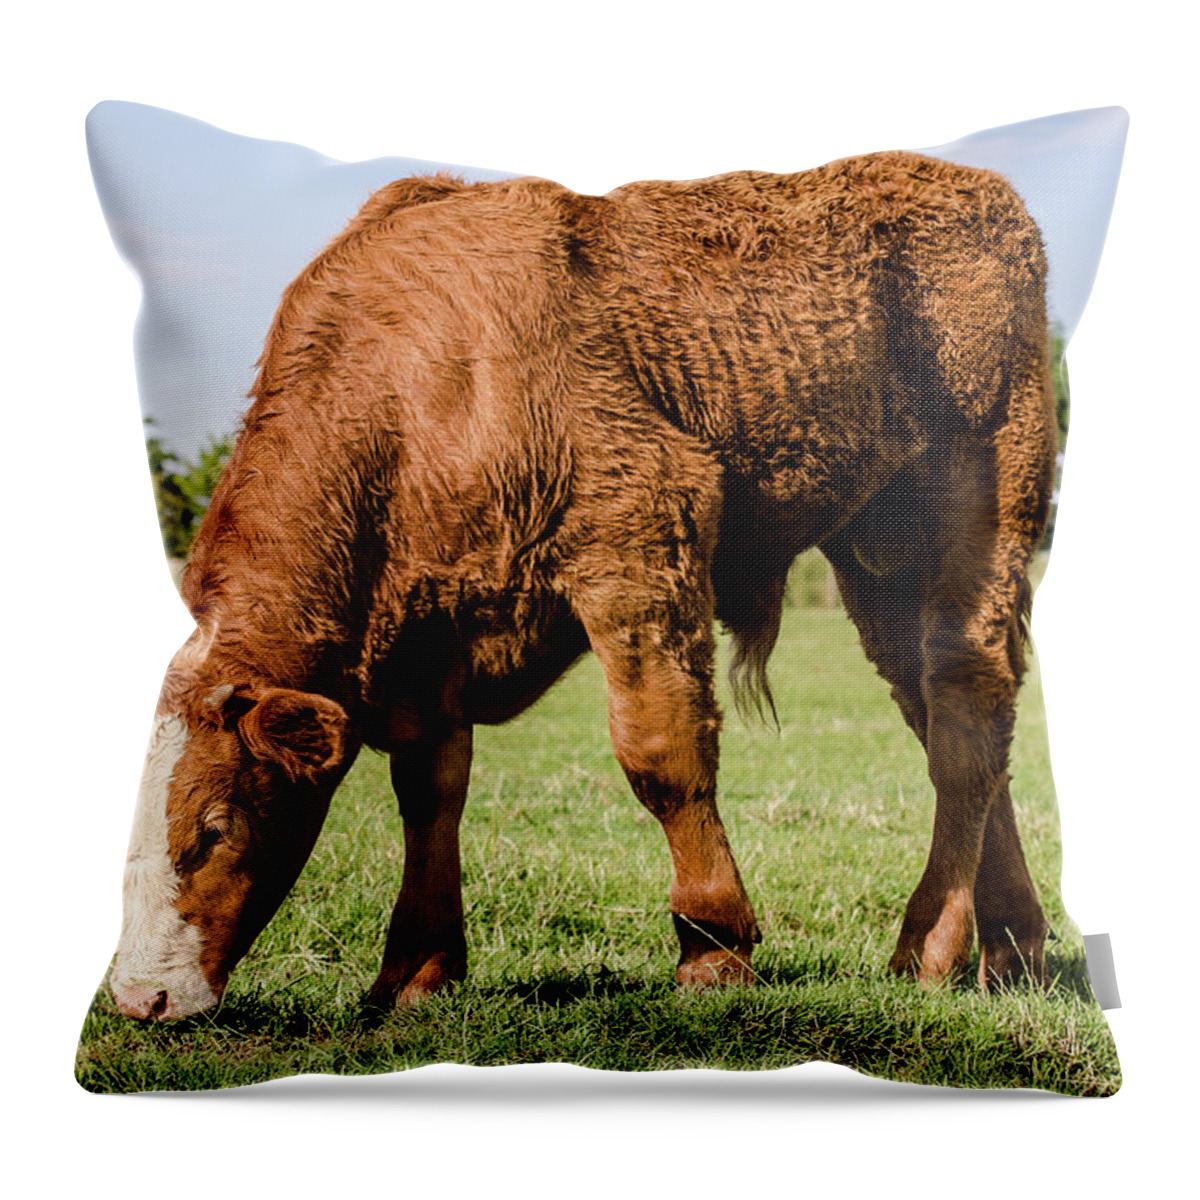 Shadow Throw Pillow featuring the photograph Calf Grazing by Shane Hardy Photography